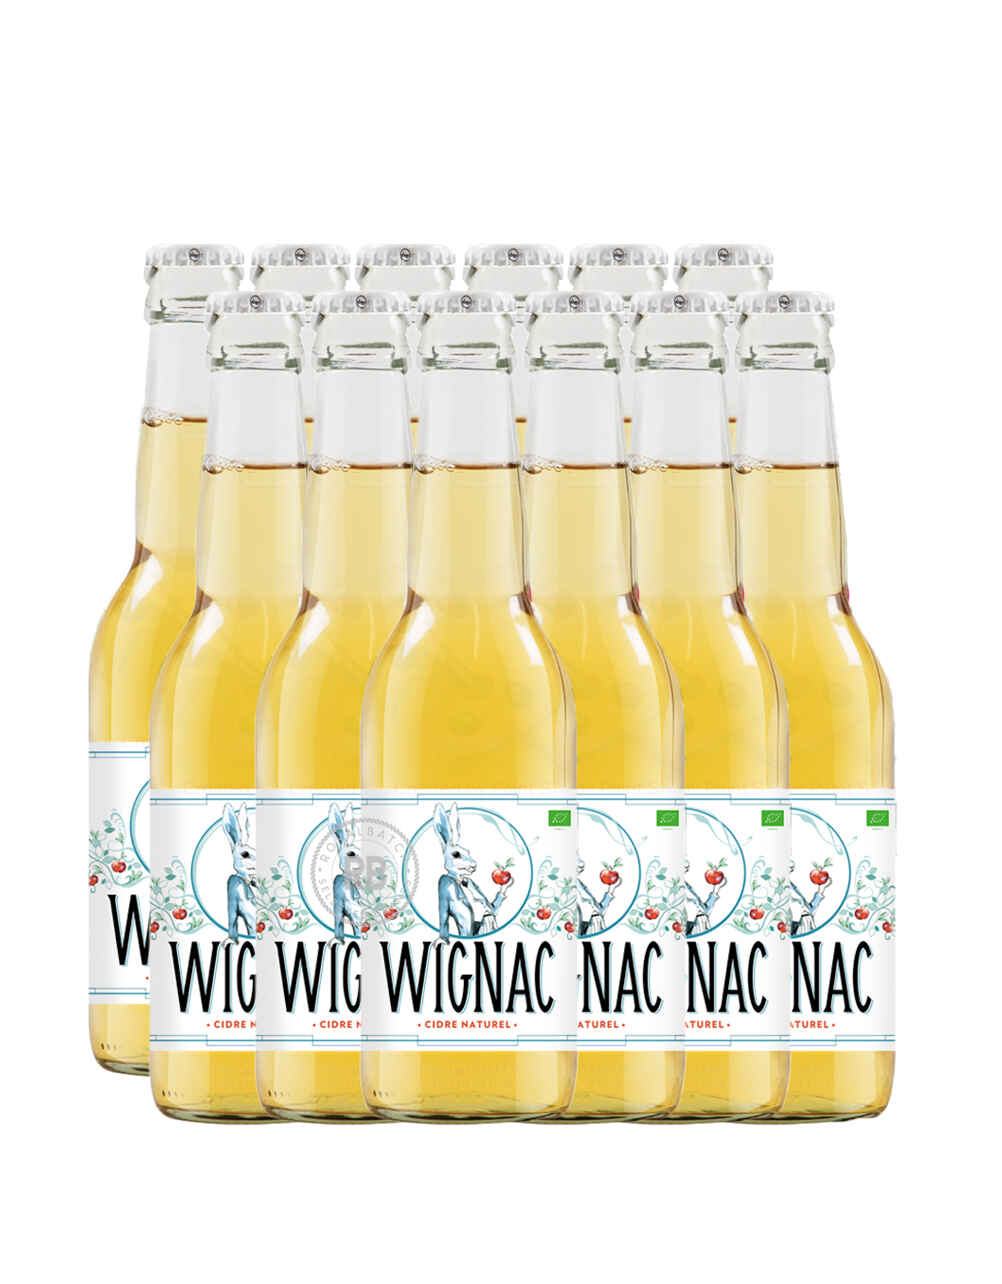 Wignac Le Lievre by French Cider and Spirits (12 Pack) x 330ml